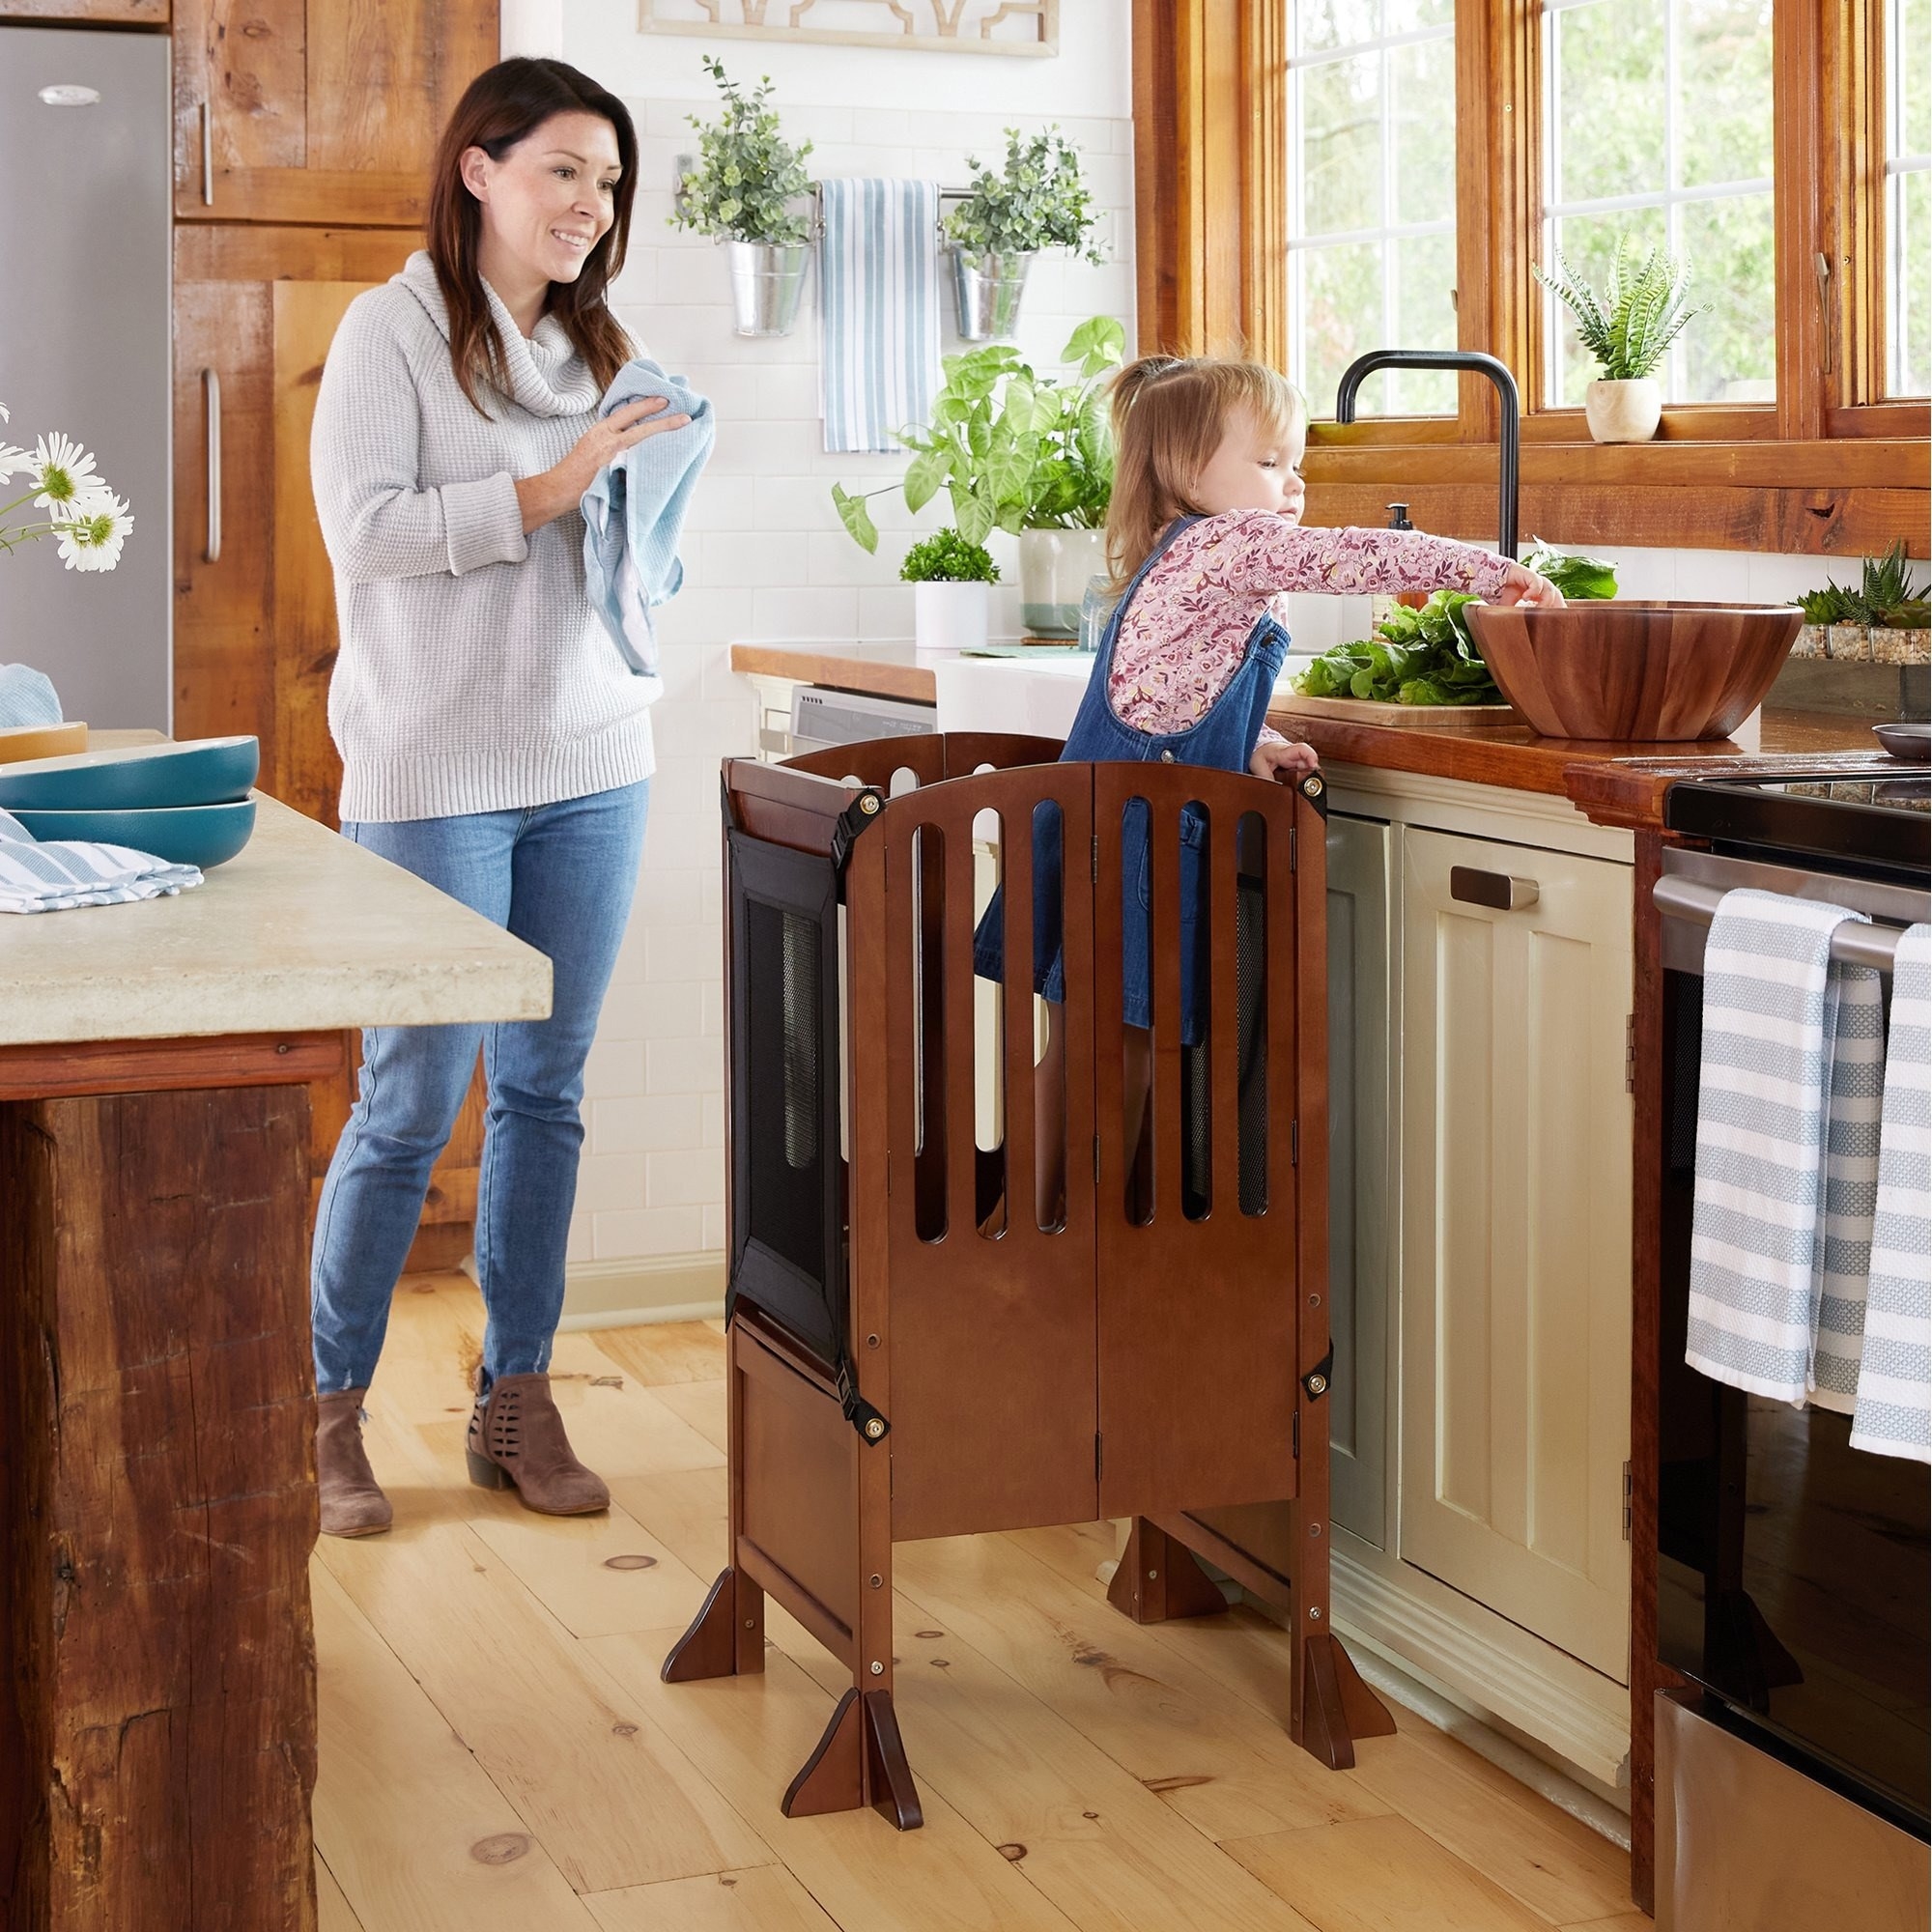 Toddler stands in kitchen helper stool while a parent watches